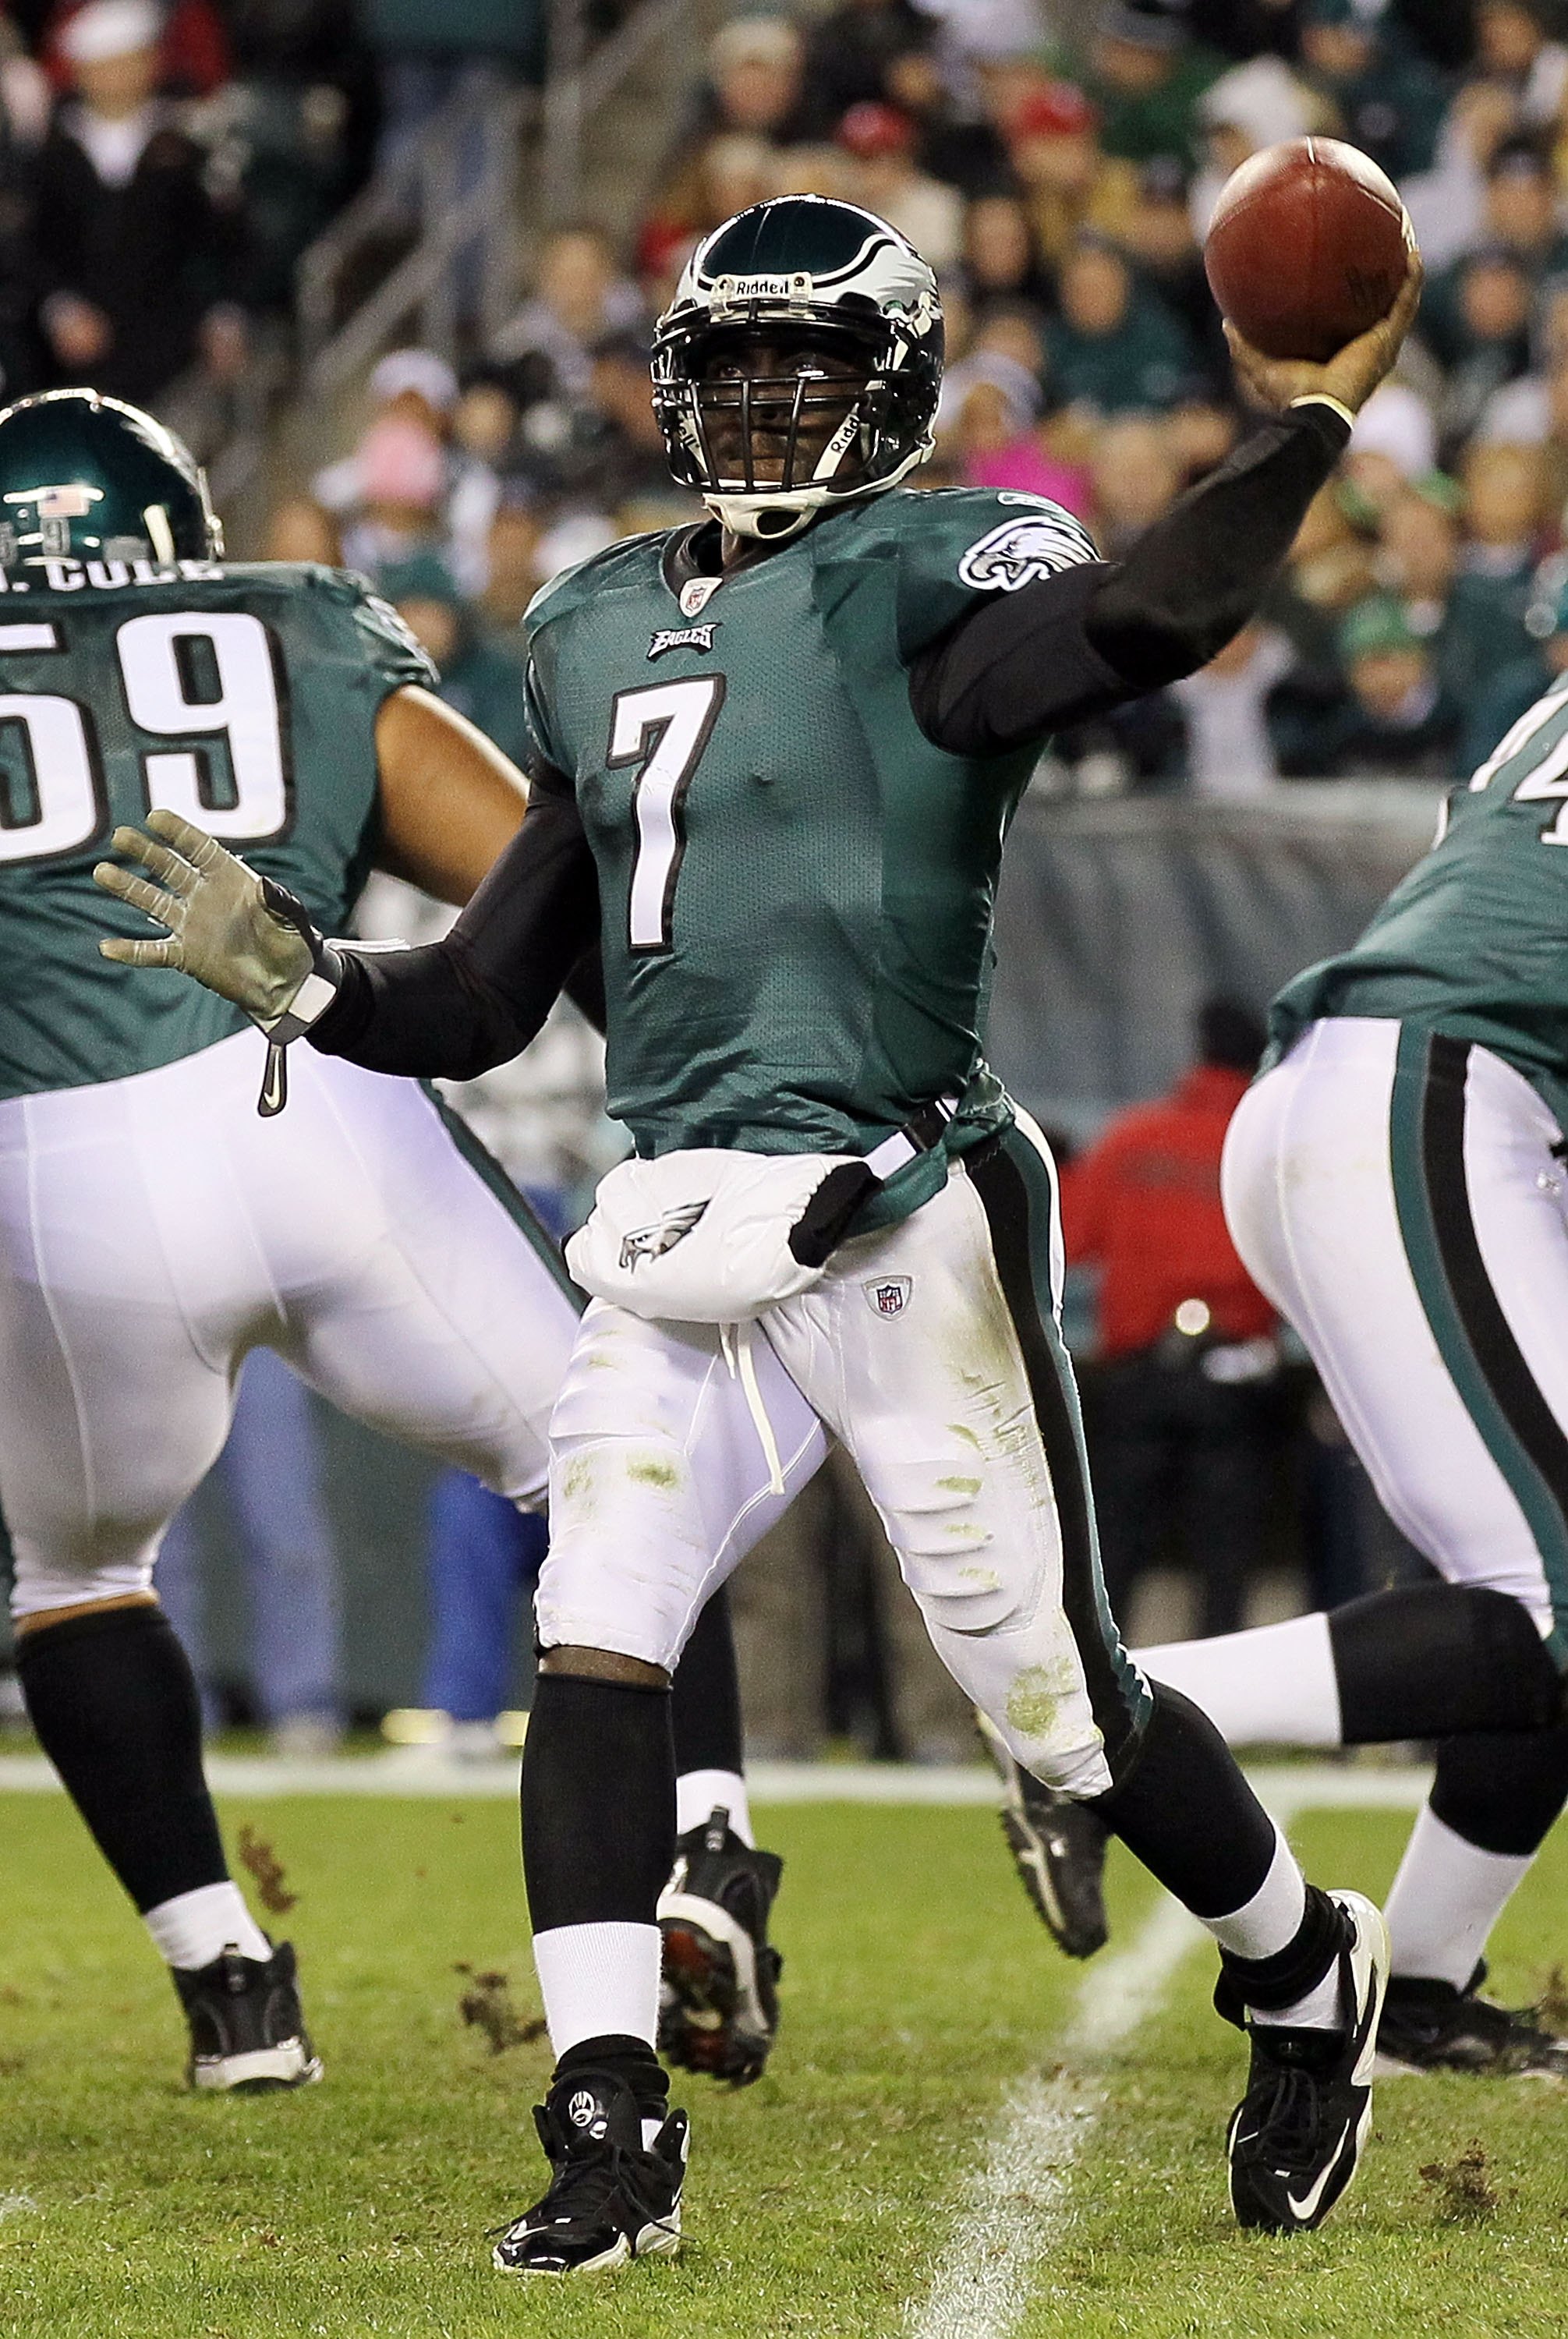 Michael Vick for NFL MVP: Making the Case for the League's Top